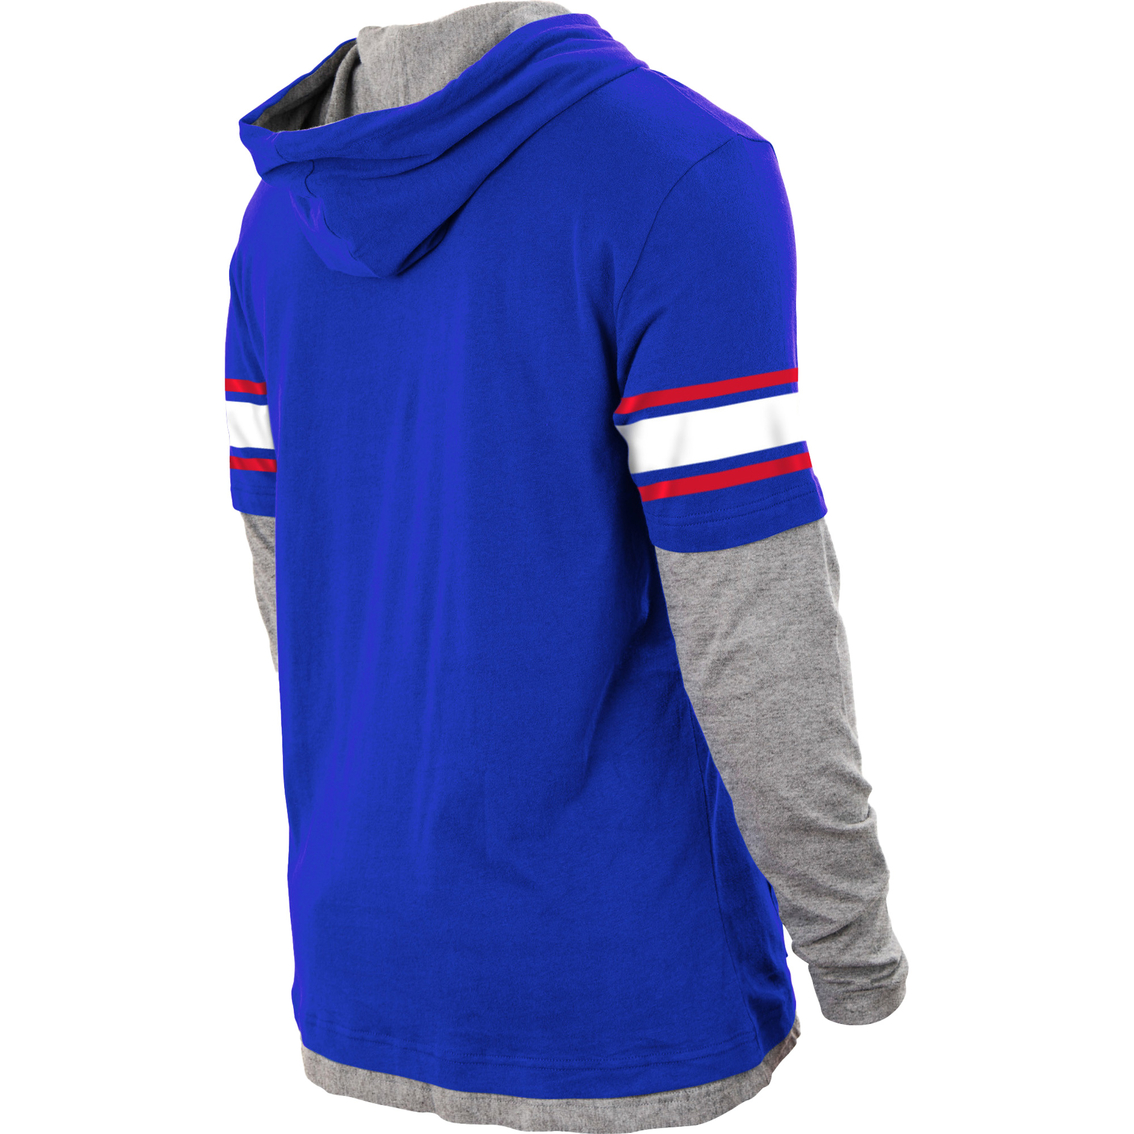 New Era Cap Co. NFL Team Brushed Cotton Pullover Hoodie - Image 2 of 5